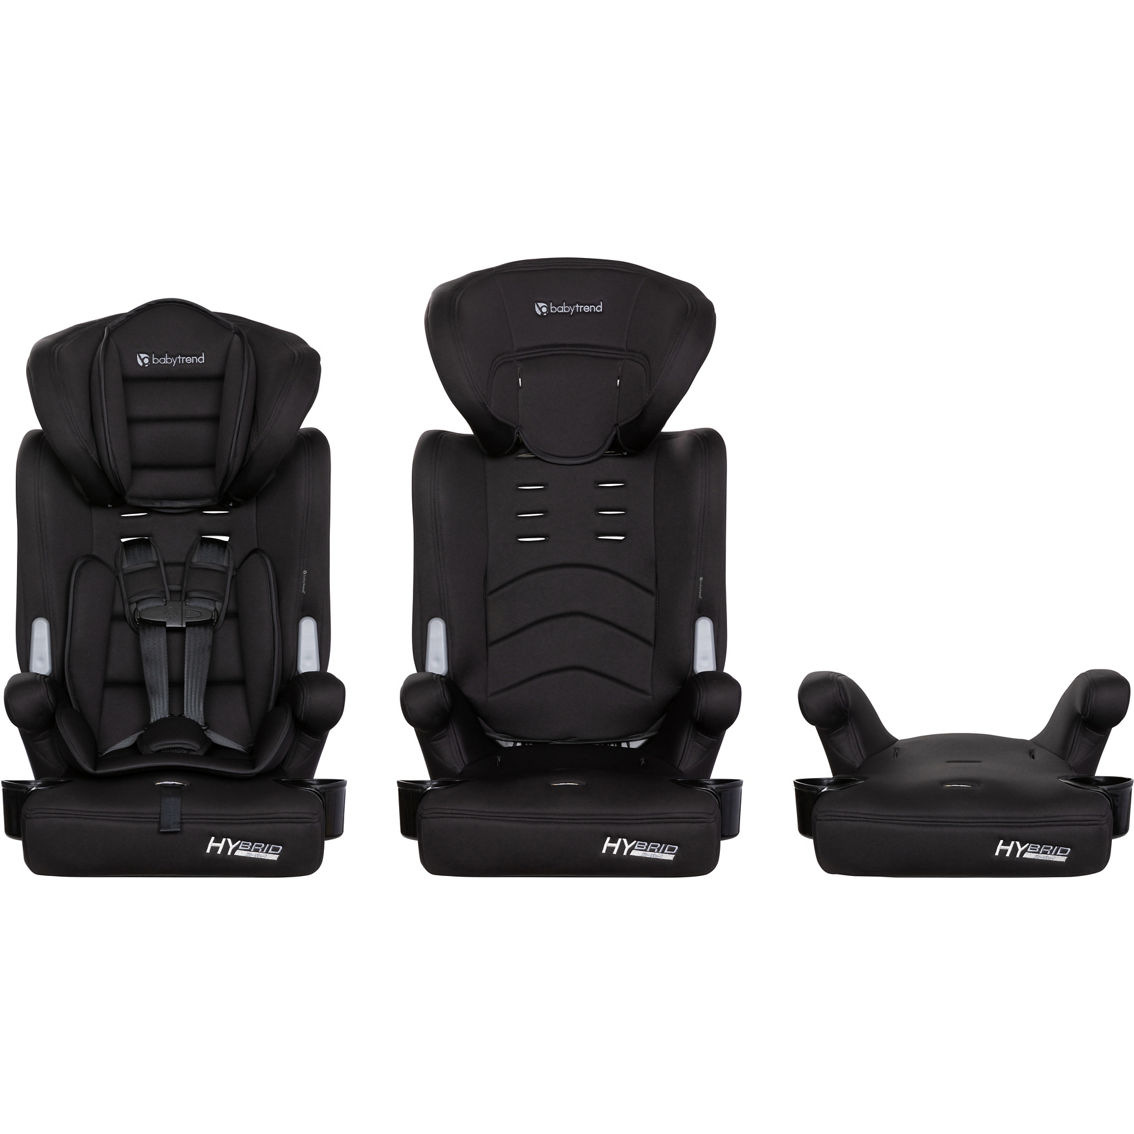 Baby Trend Hybrid 3-in-1 Combination Booster Car Seat - Image 2 of 5